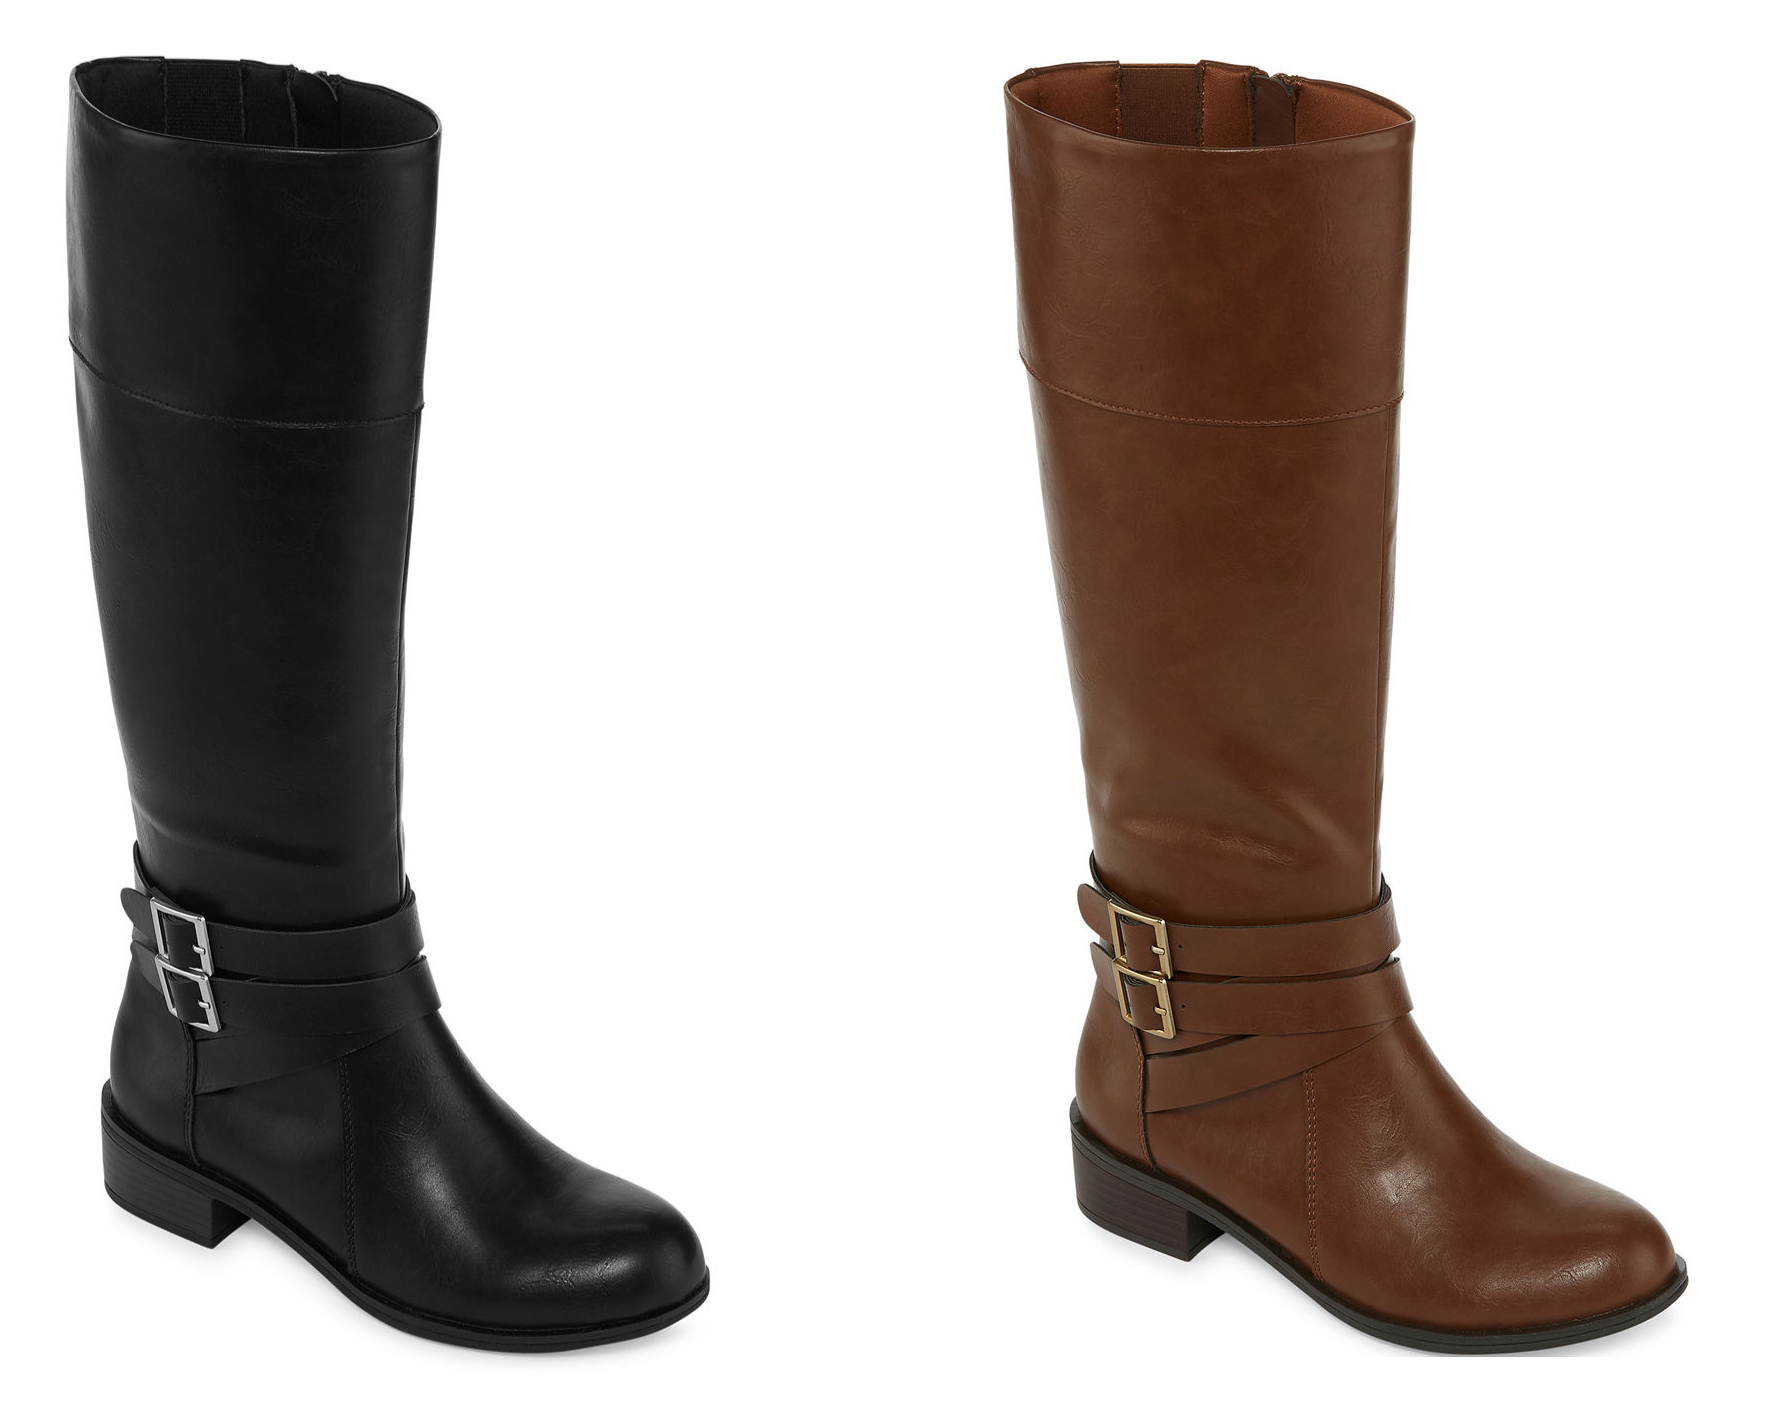 jcpenney arizona boots sale